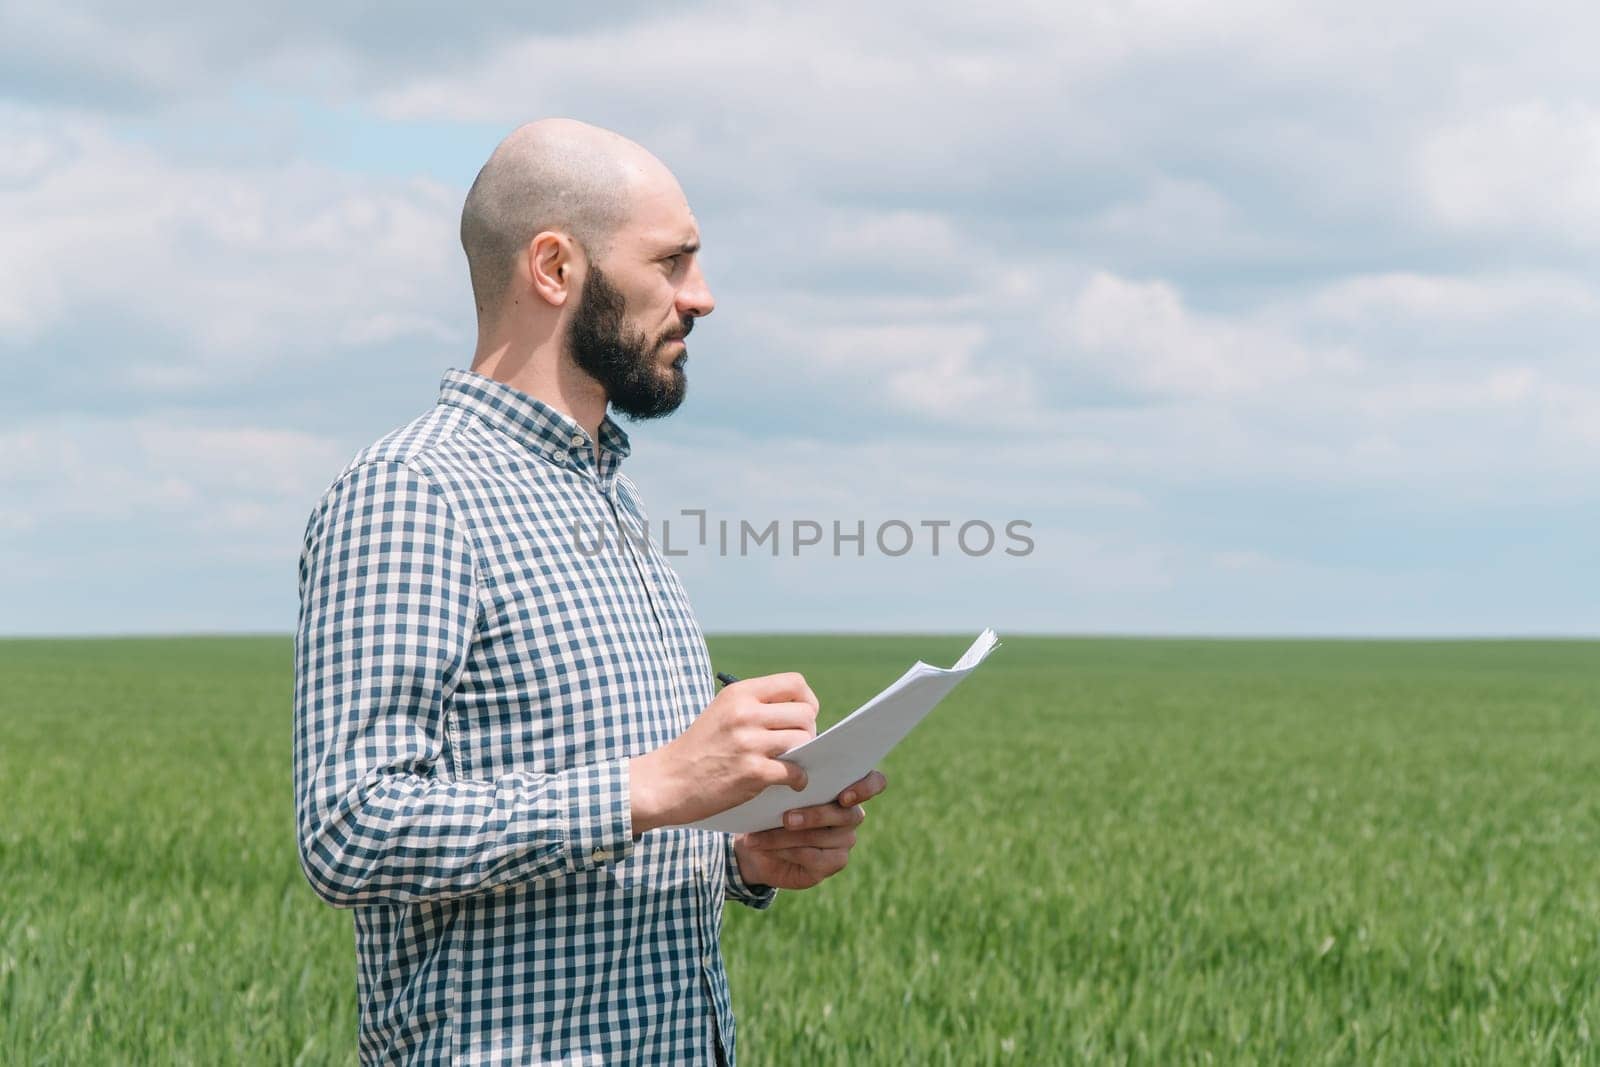 Agronomist or farmer examines the growth of wheat. Farmer examines the field of cereals